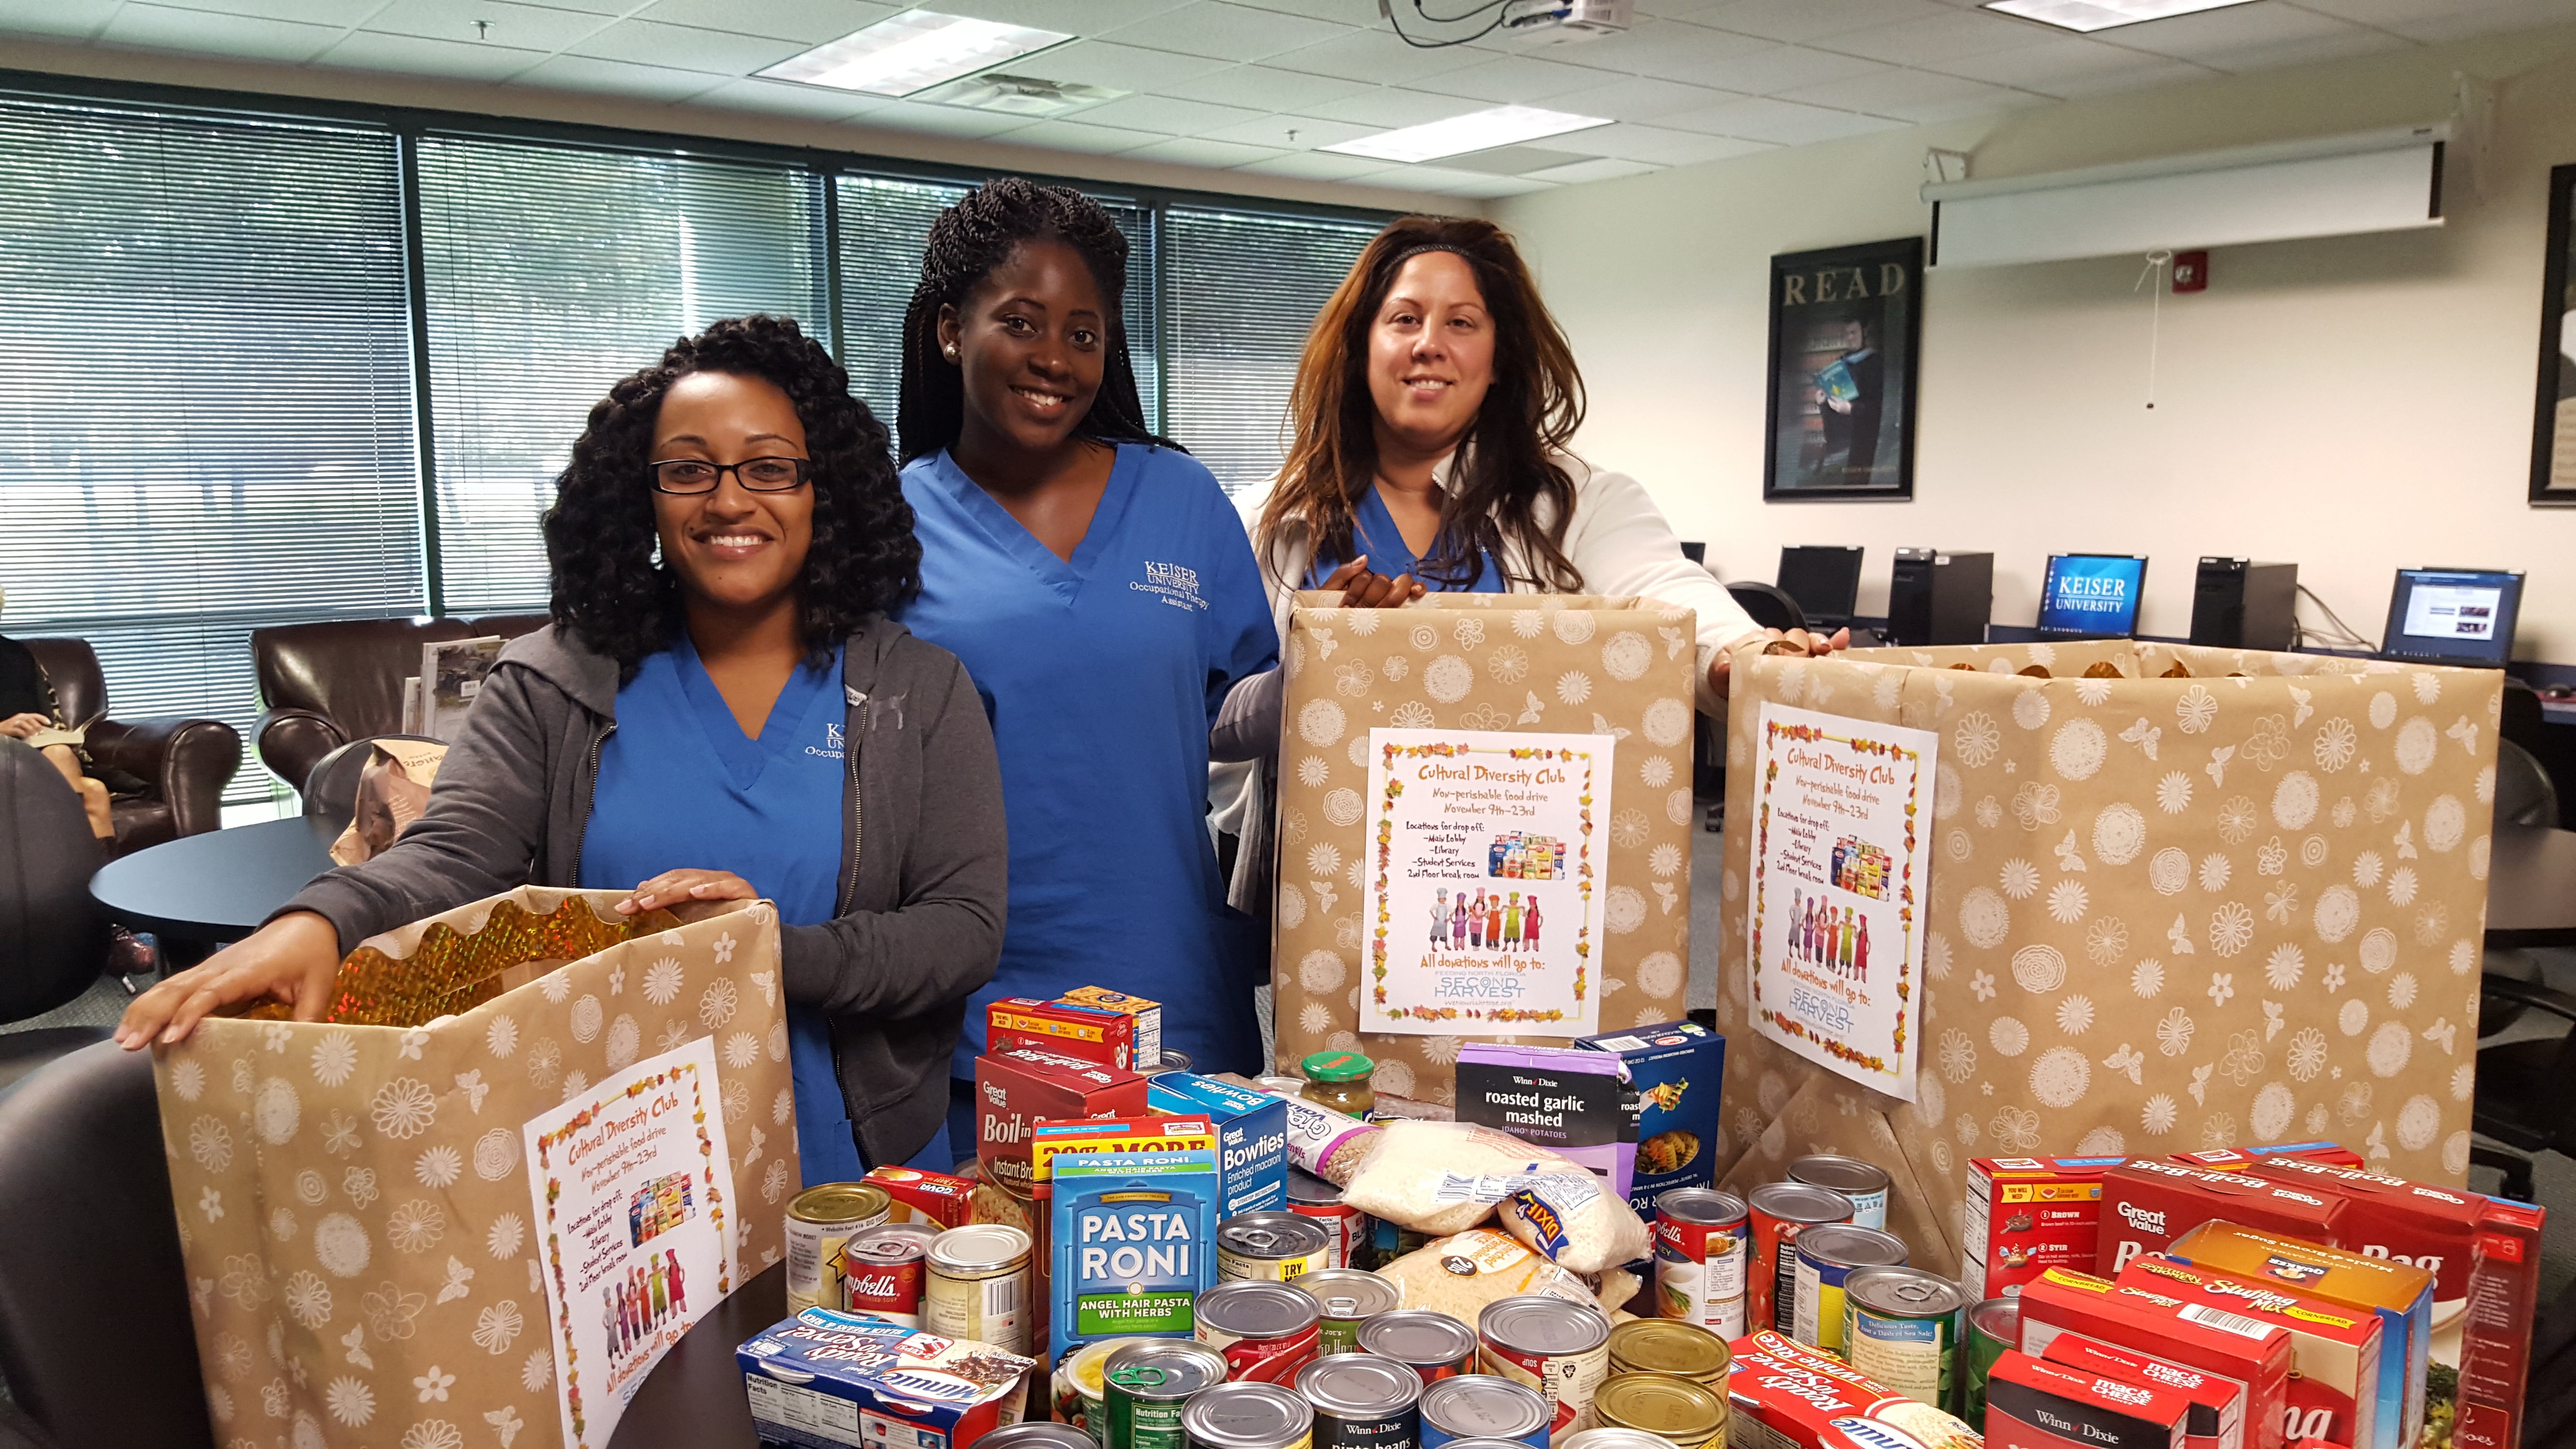 The Cultural Diversity Club in Jacksonville Donated Food to Local Shelter